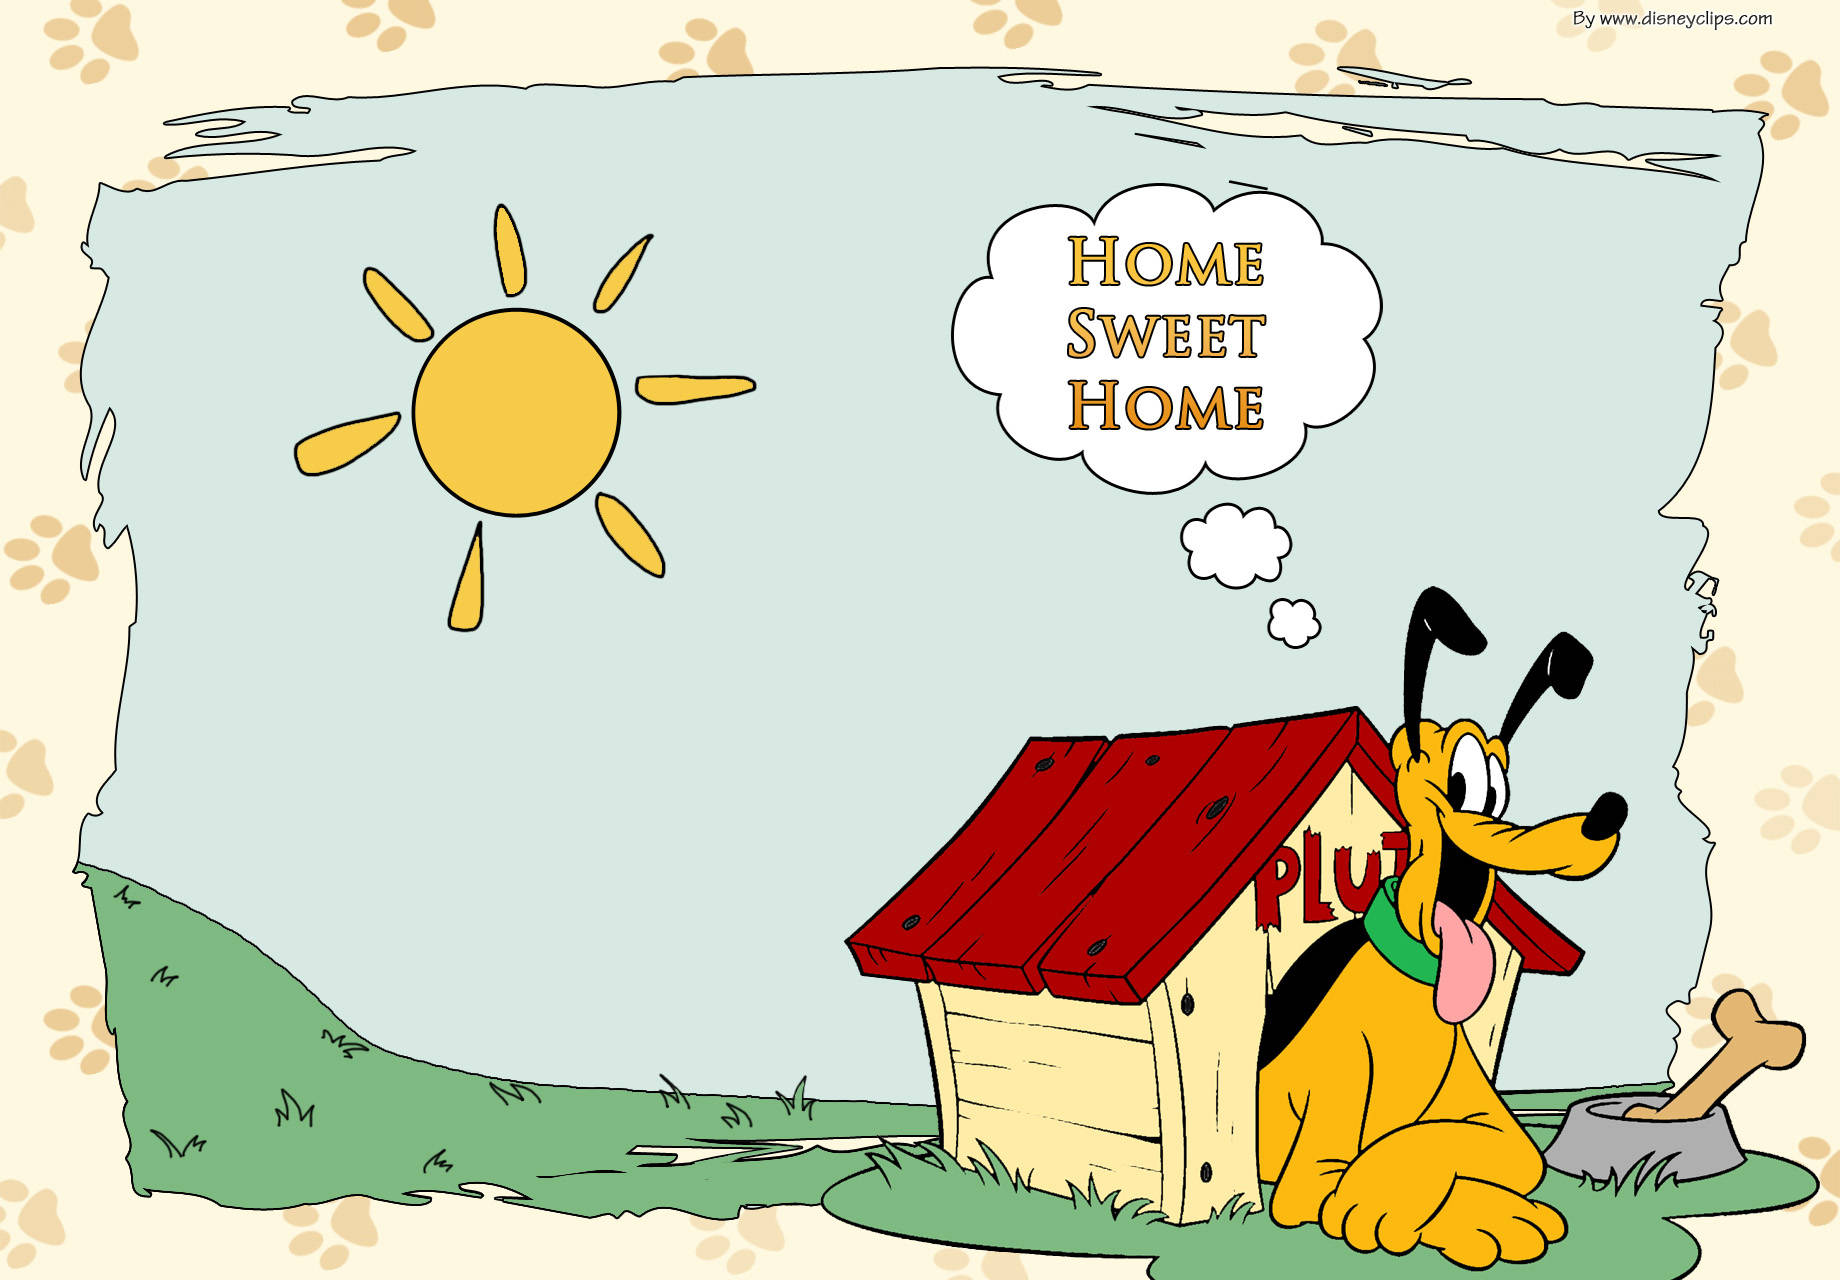 Disney Pluto Home Sweet Home Background